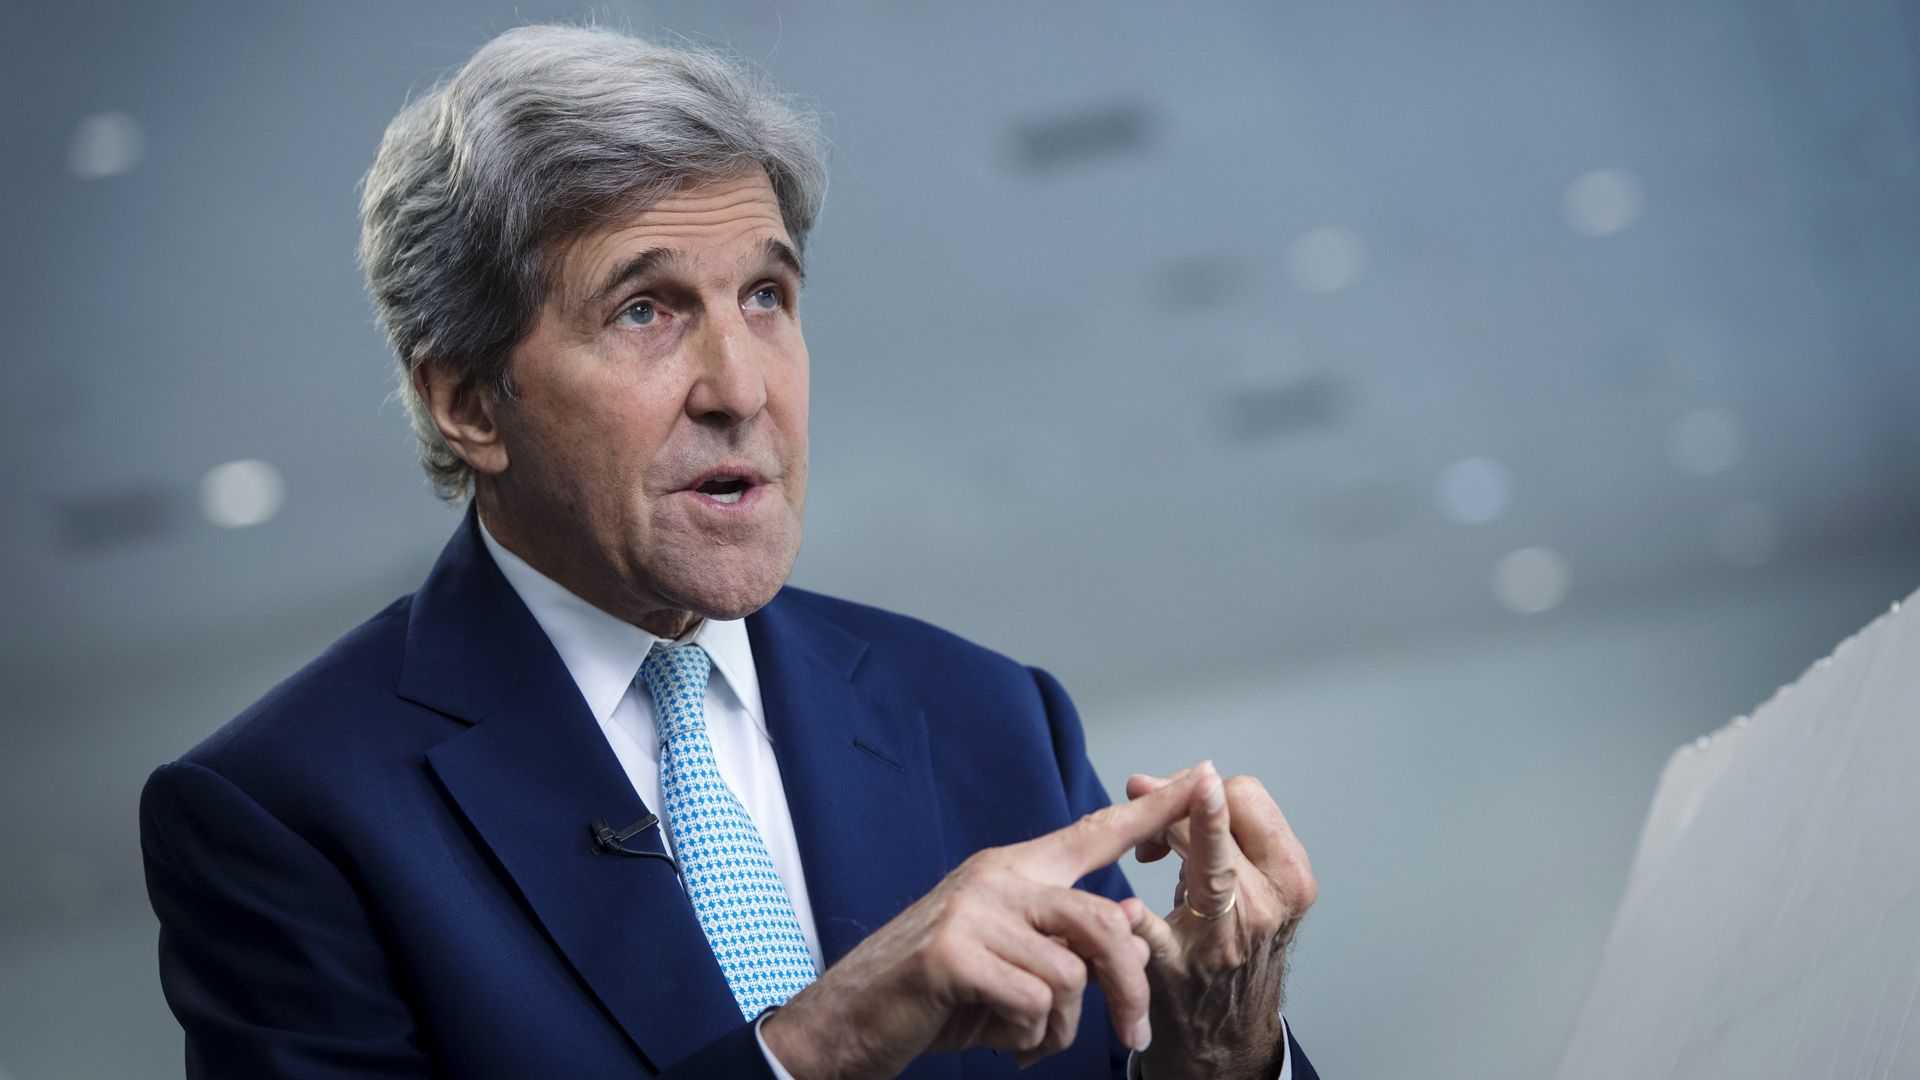 John Kerry speaks during a Bloomberg Television interview.